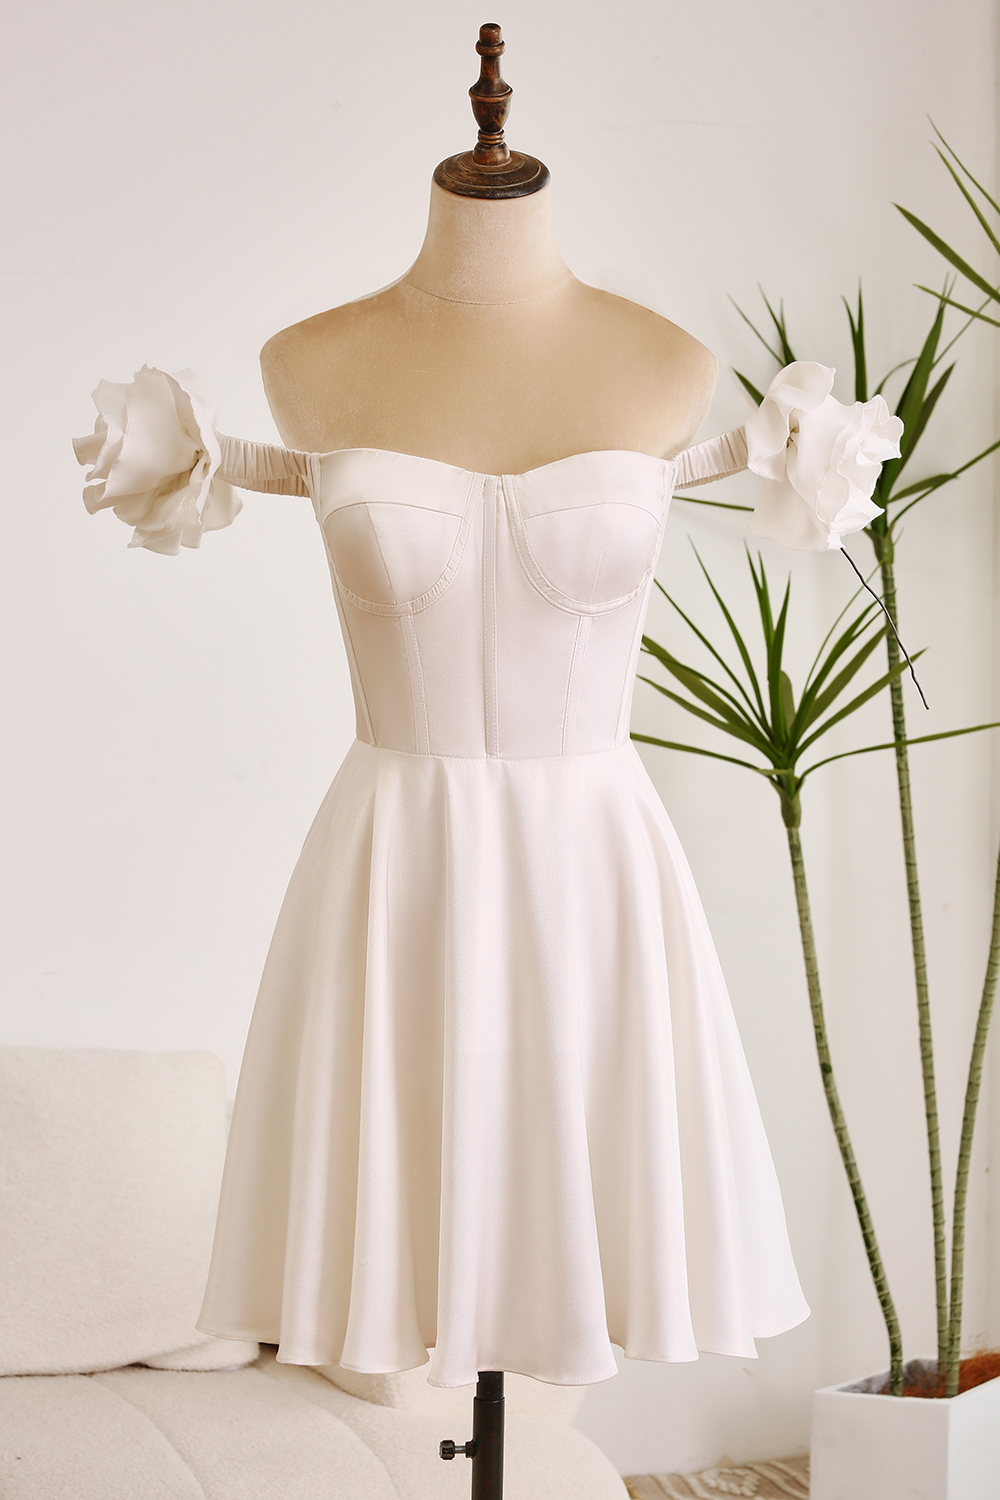 White A-Line Off The Shoulder Short Graduation Dress with Flowers